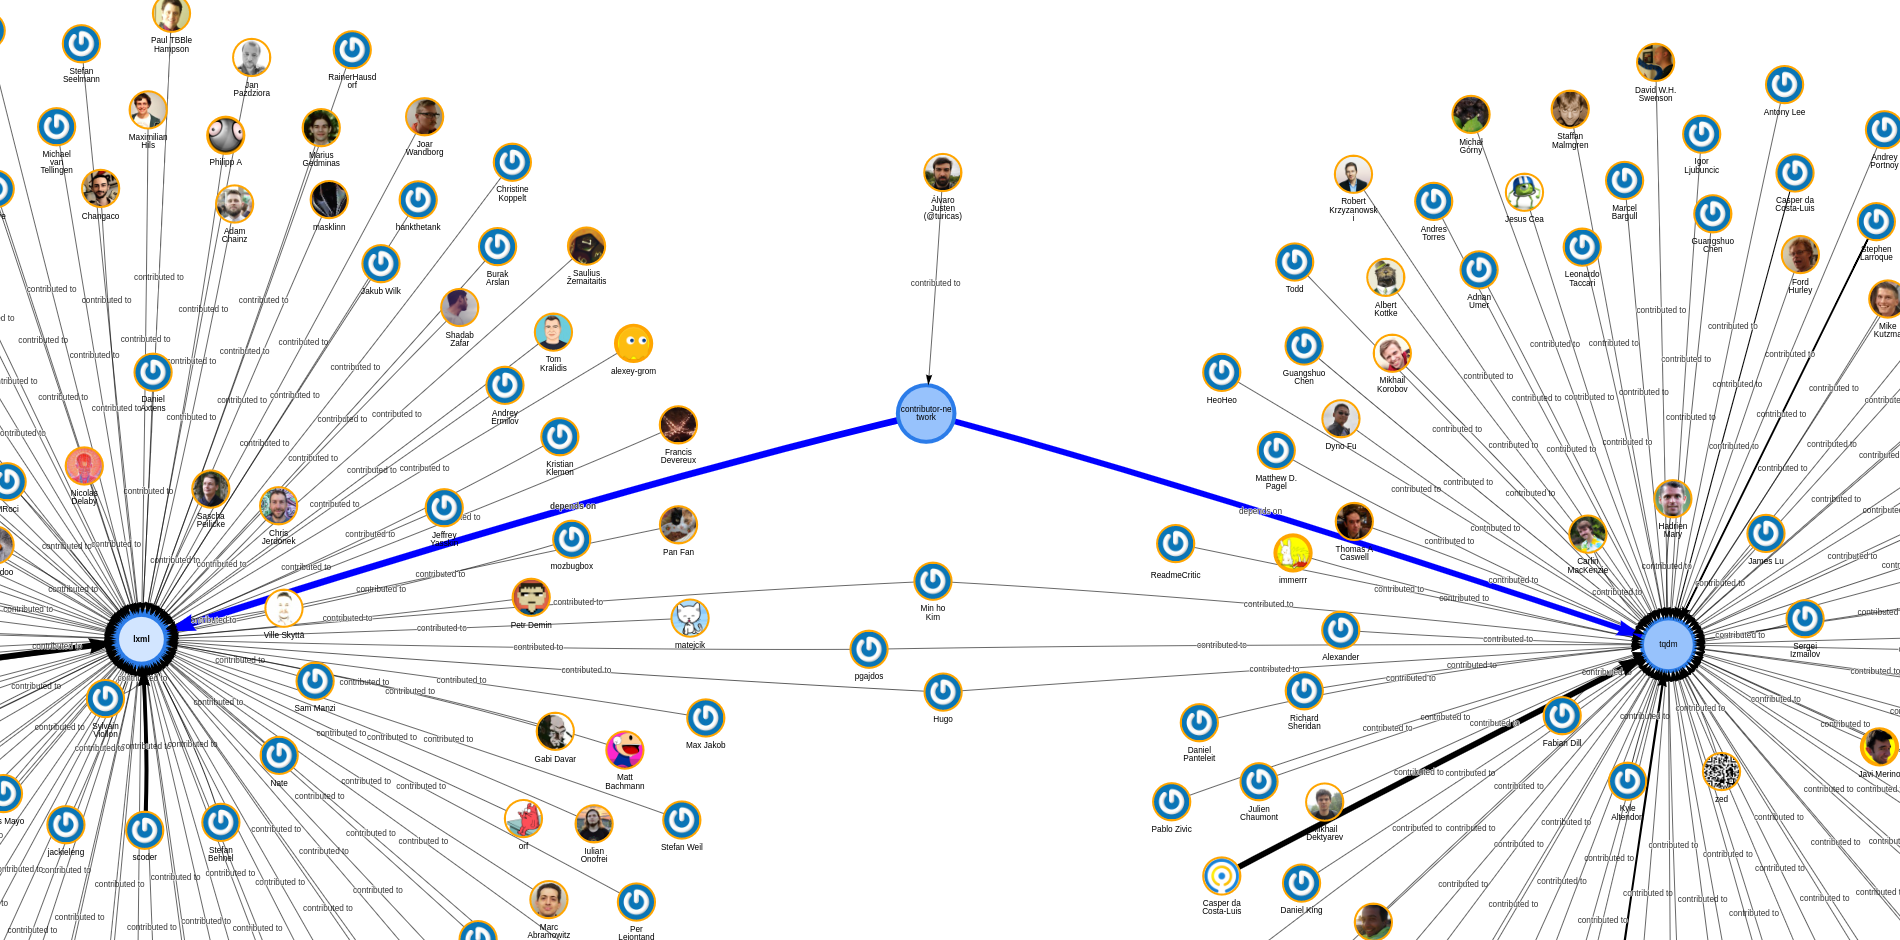 contributor-network-graph.png